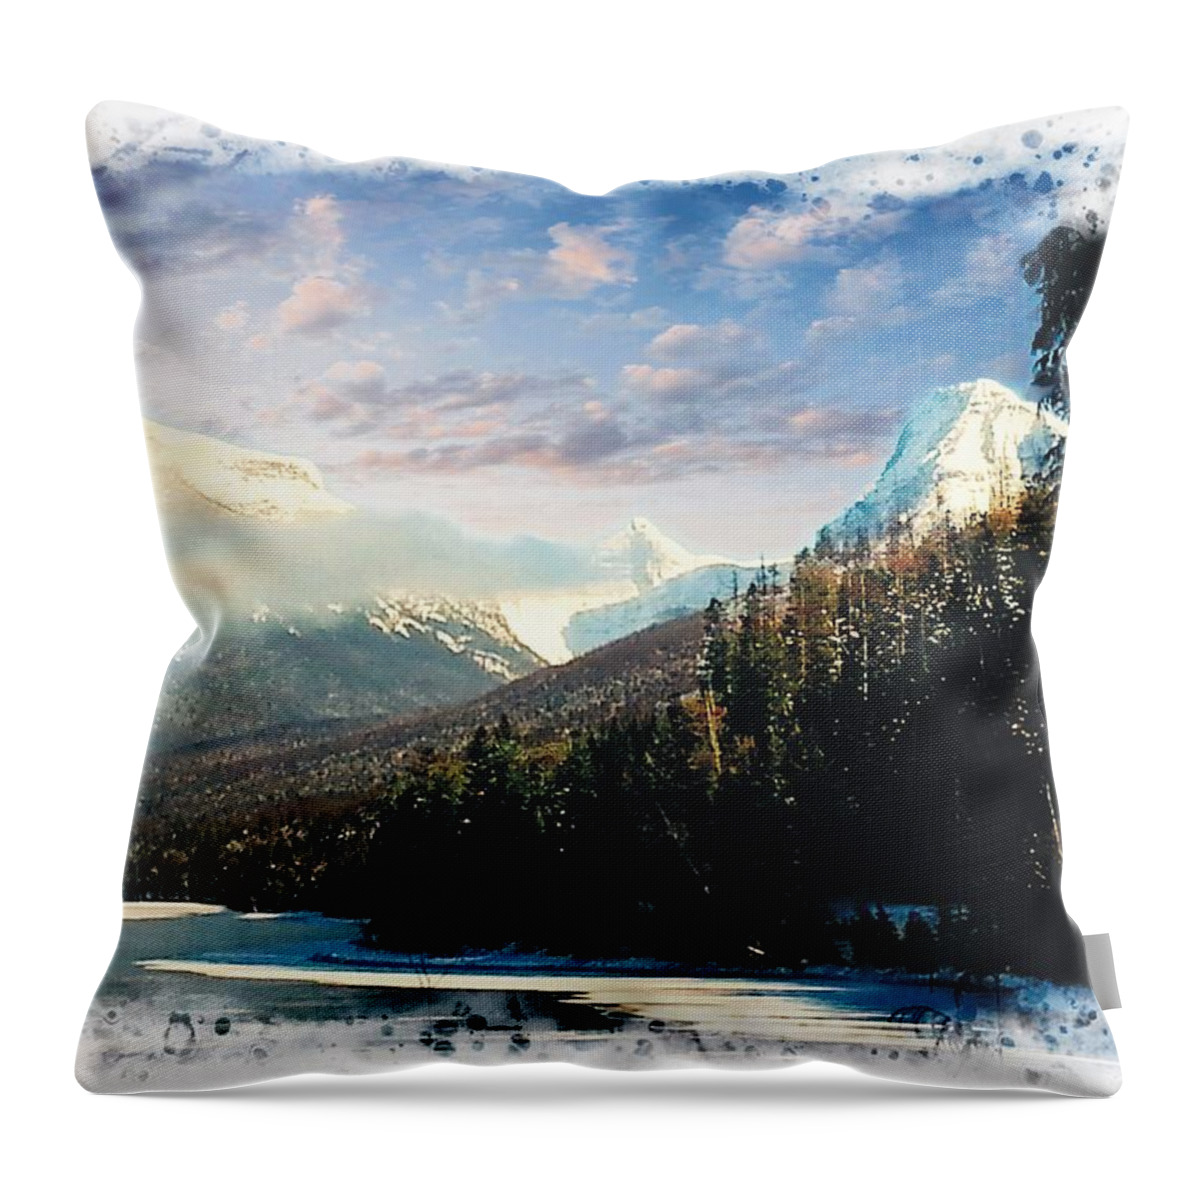 Glacier National Park Throw Pillow featuring the photograph Glacier National Park by Joe Duket